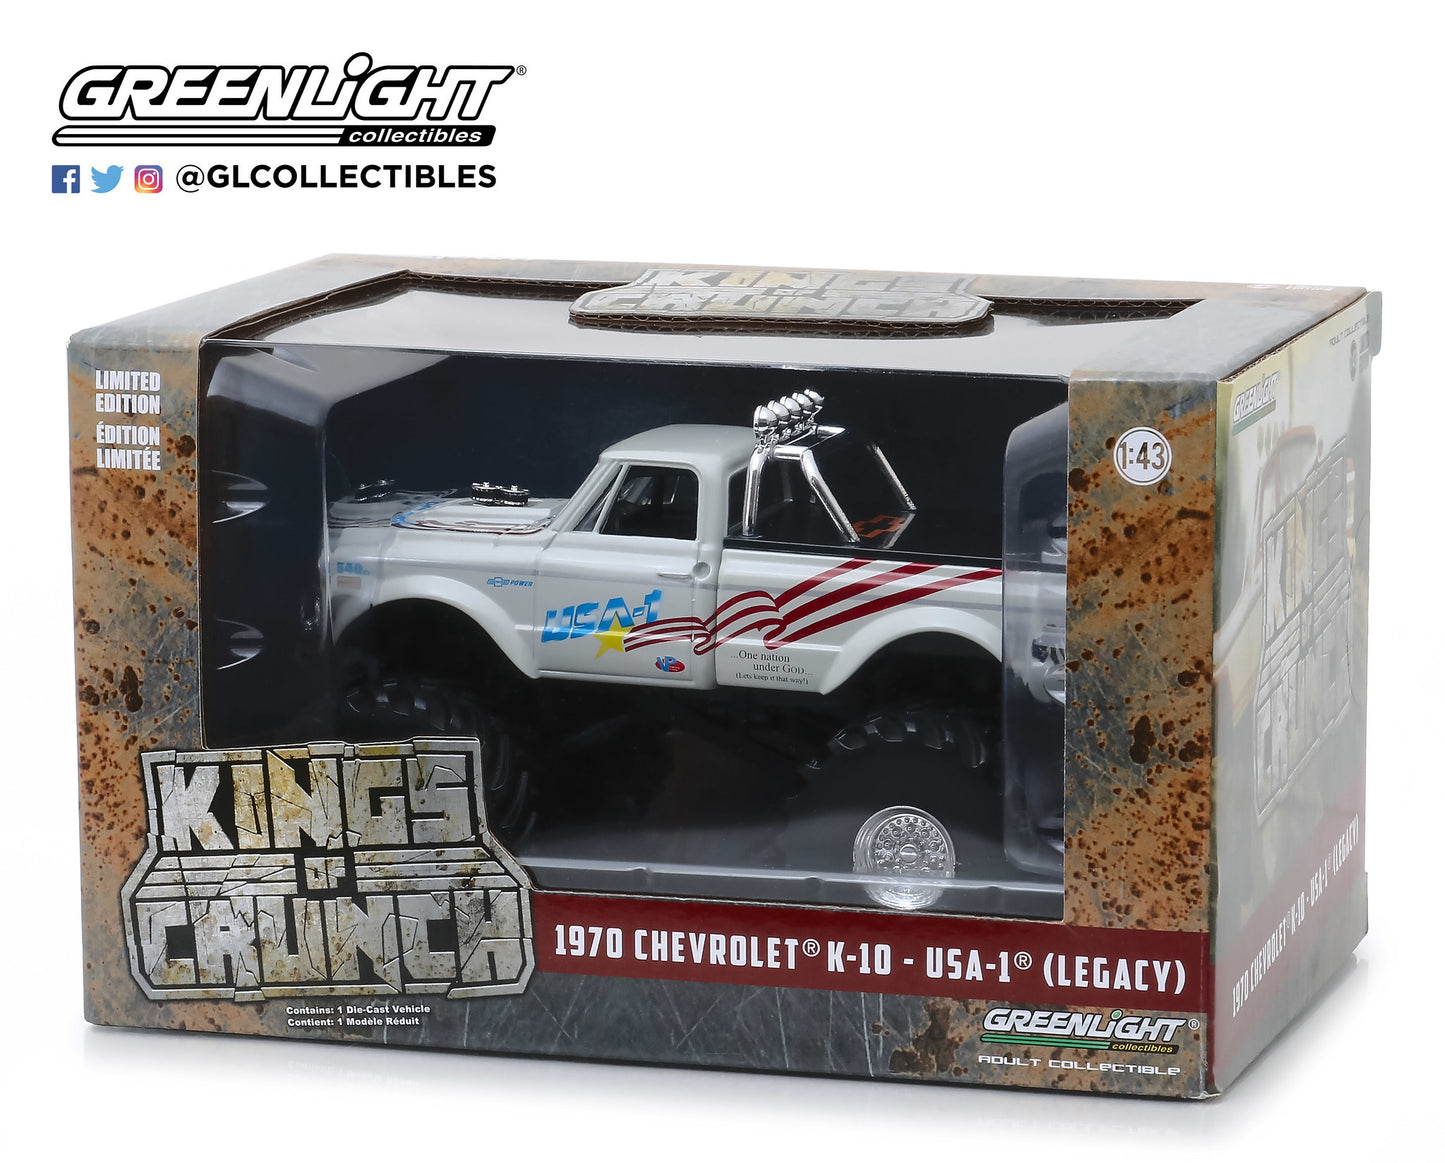 1:43 Kings of Crunch - USA-1 - 1970 Chevrolet K-10 Monster Truck (with 66-Inch Tires)